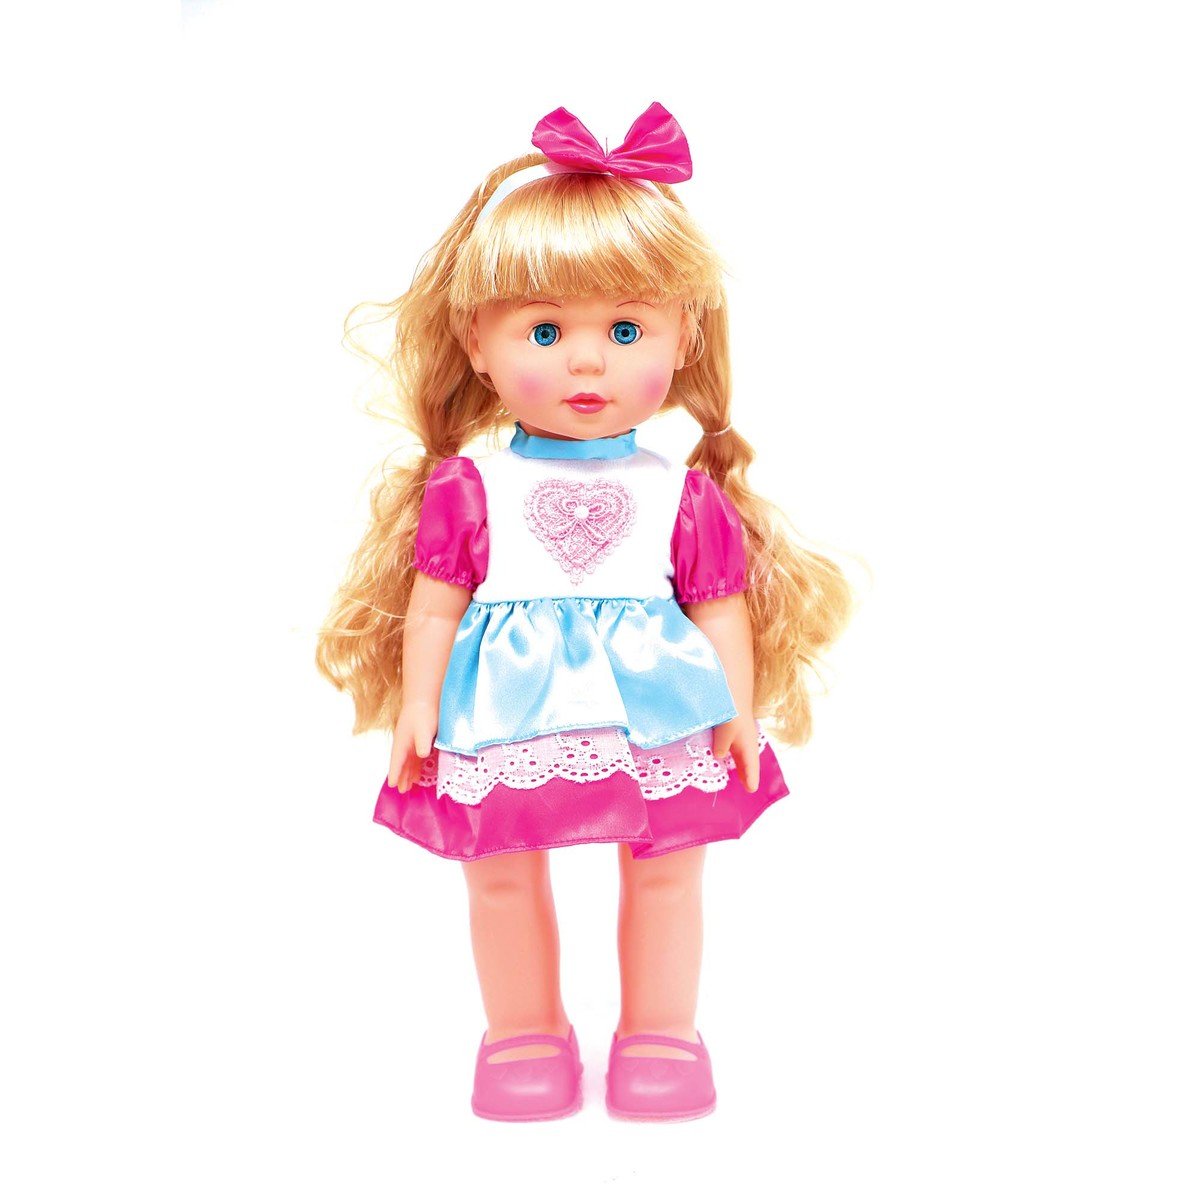 Fabiola Battery Operated Function Baby Doll 68037